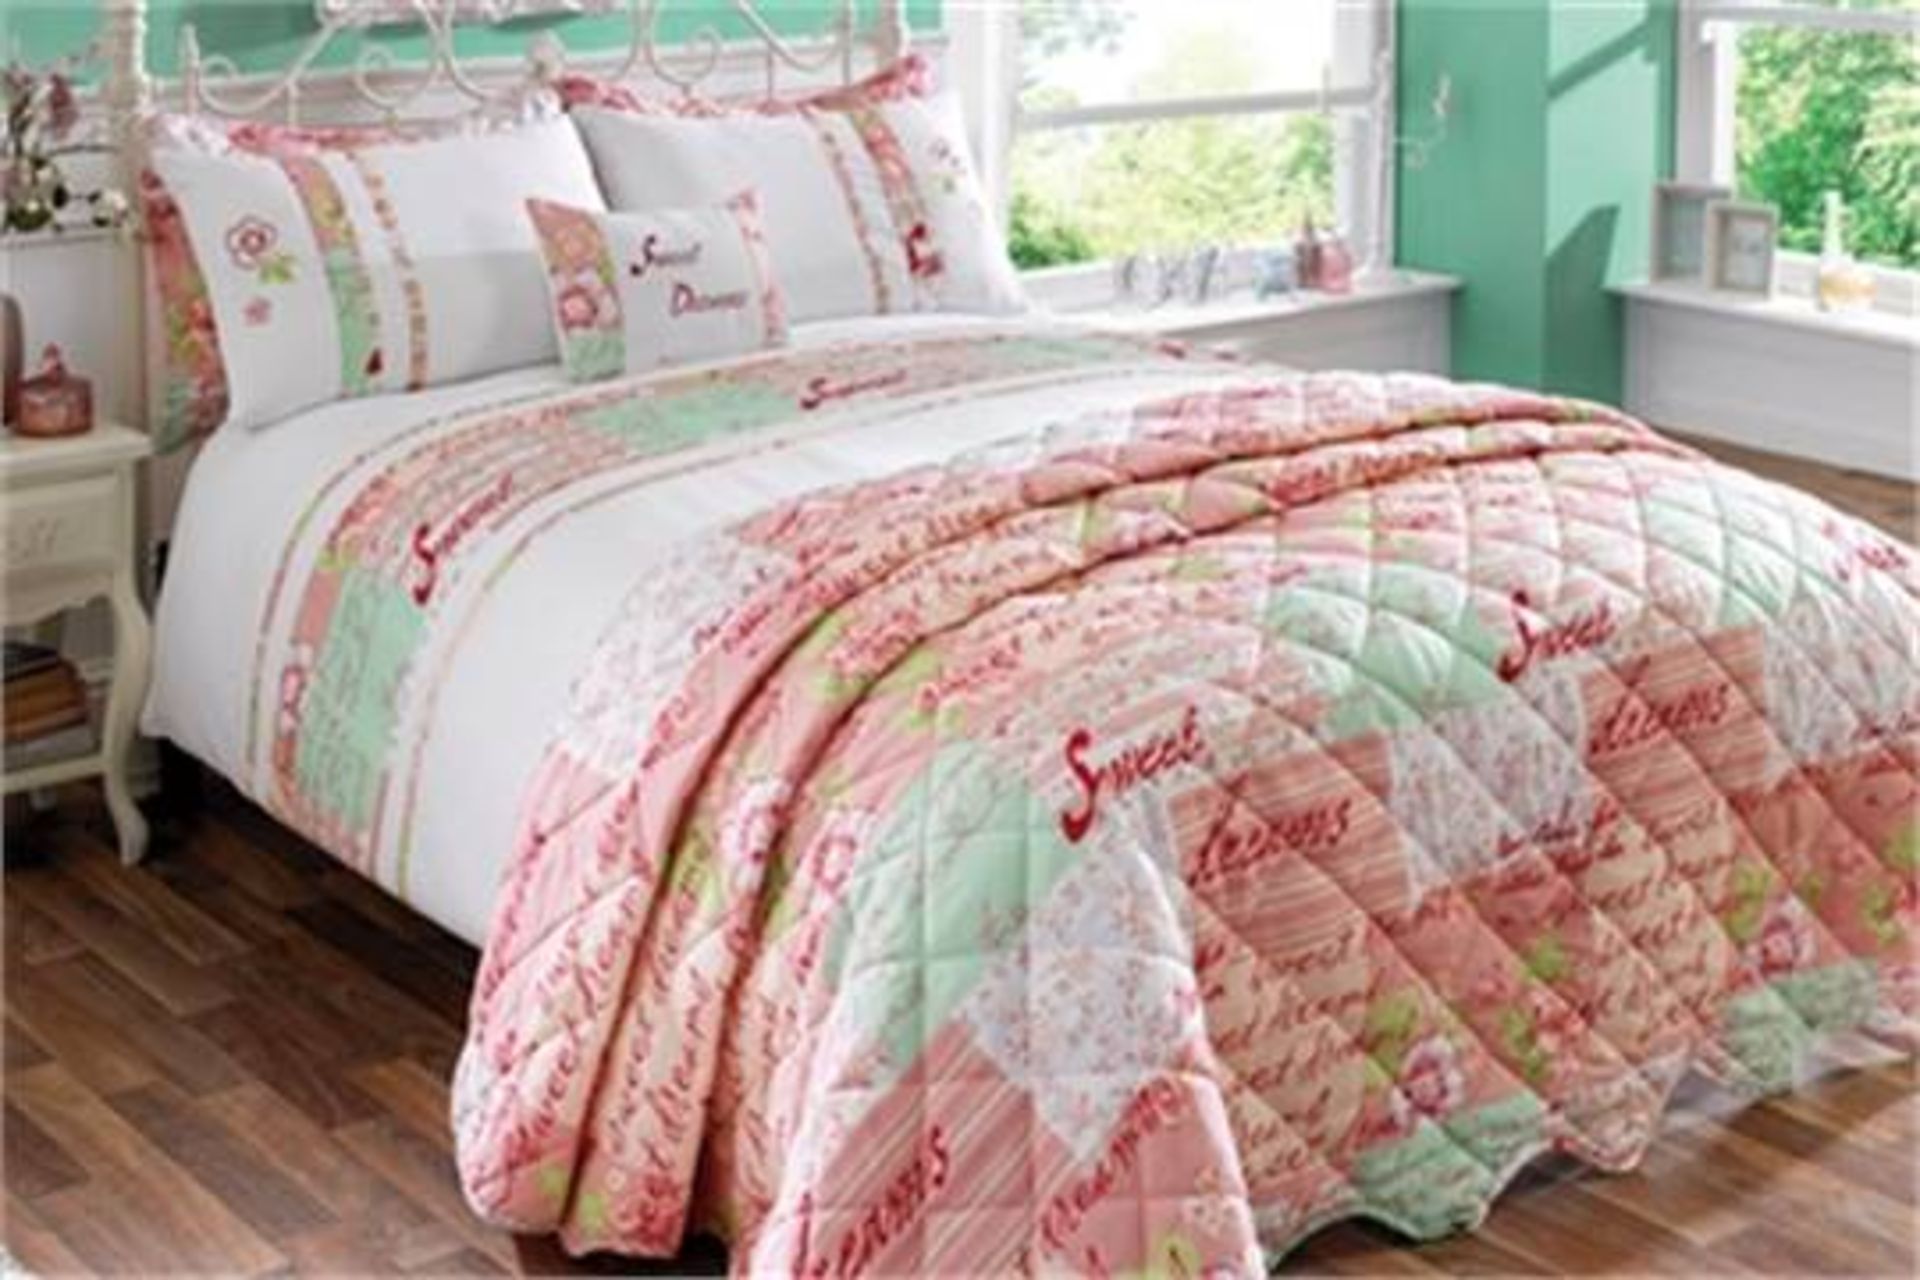 RINGLEY PATCHWORK BED SPREAD 220X240 RRP £99 (SHIPPING BAND A)